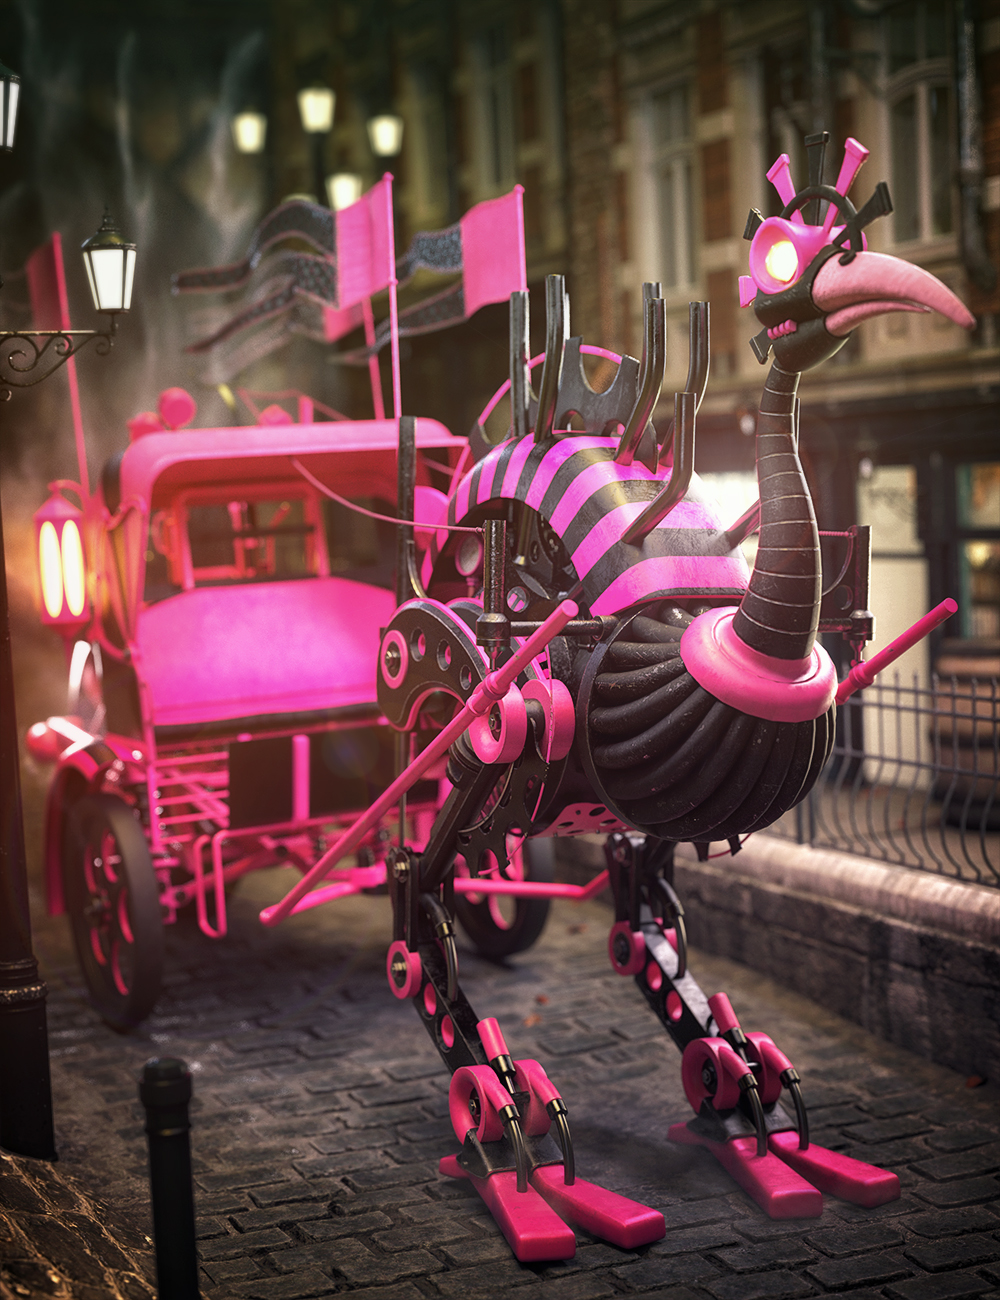 Steam & Punk Textures for the Steampunk Ostrich and Carriage